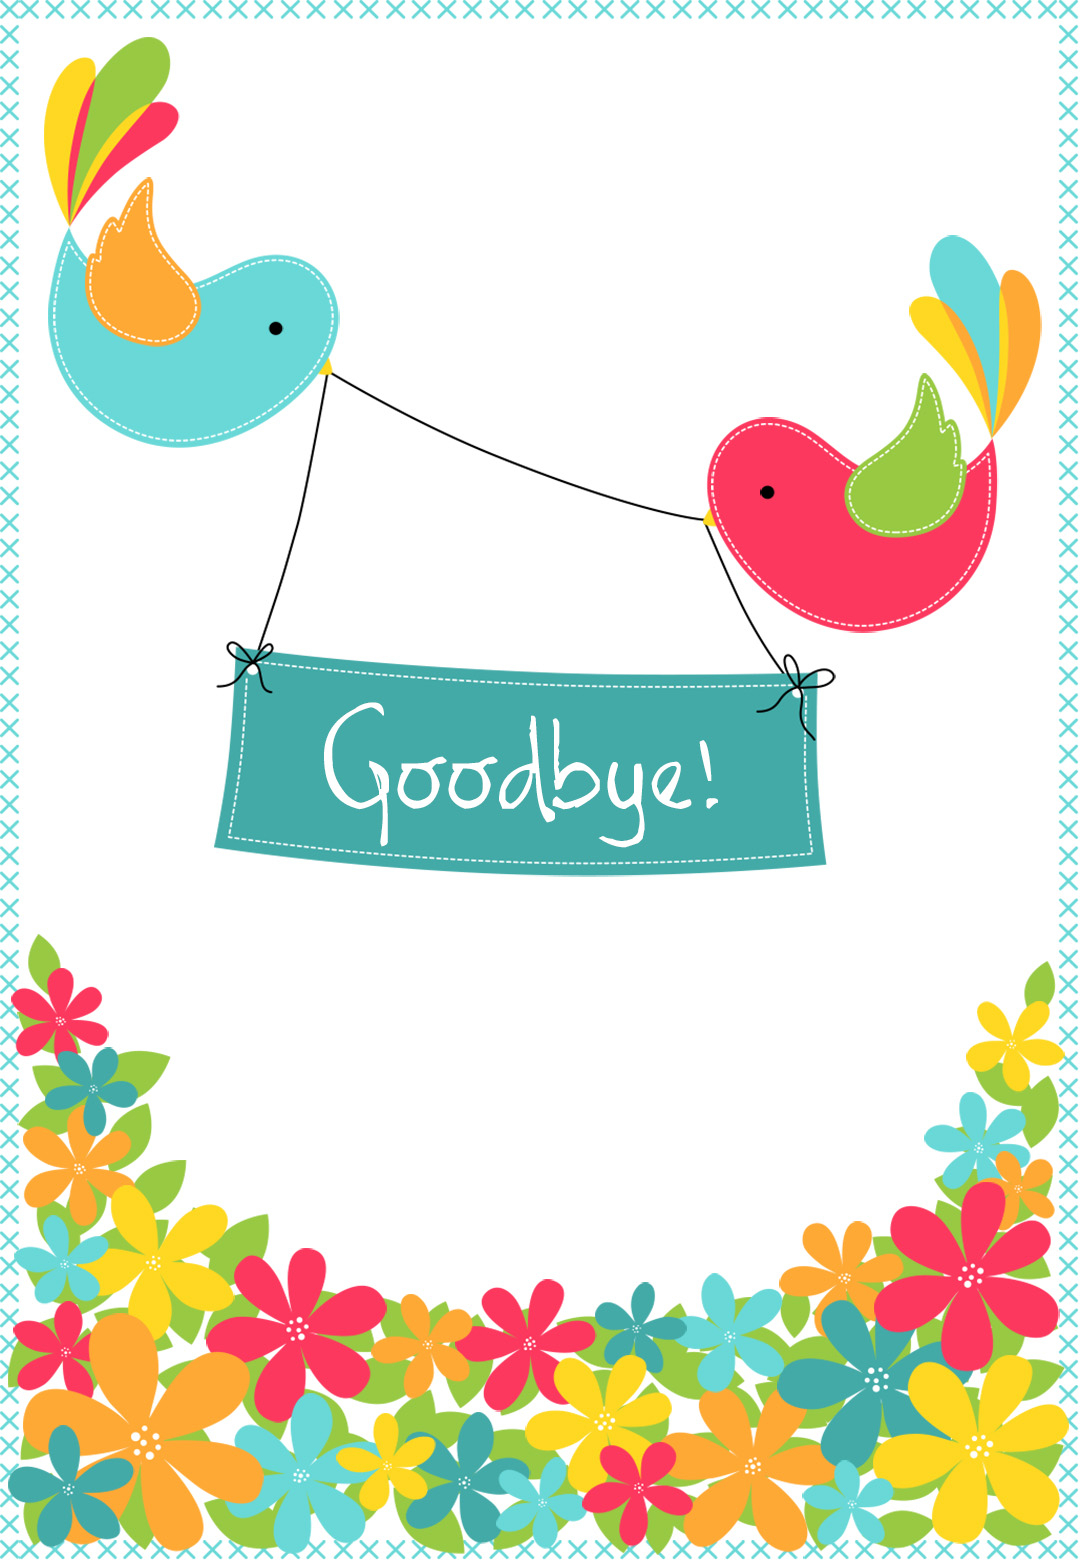 Goodbye From Your Colleagues – Good Luck Card (Free Intended For Goodbye Card Template